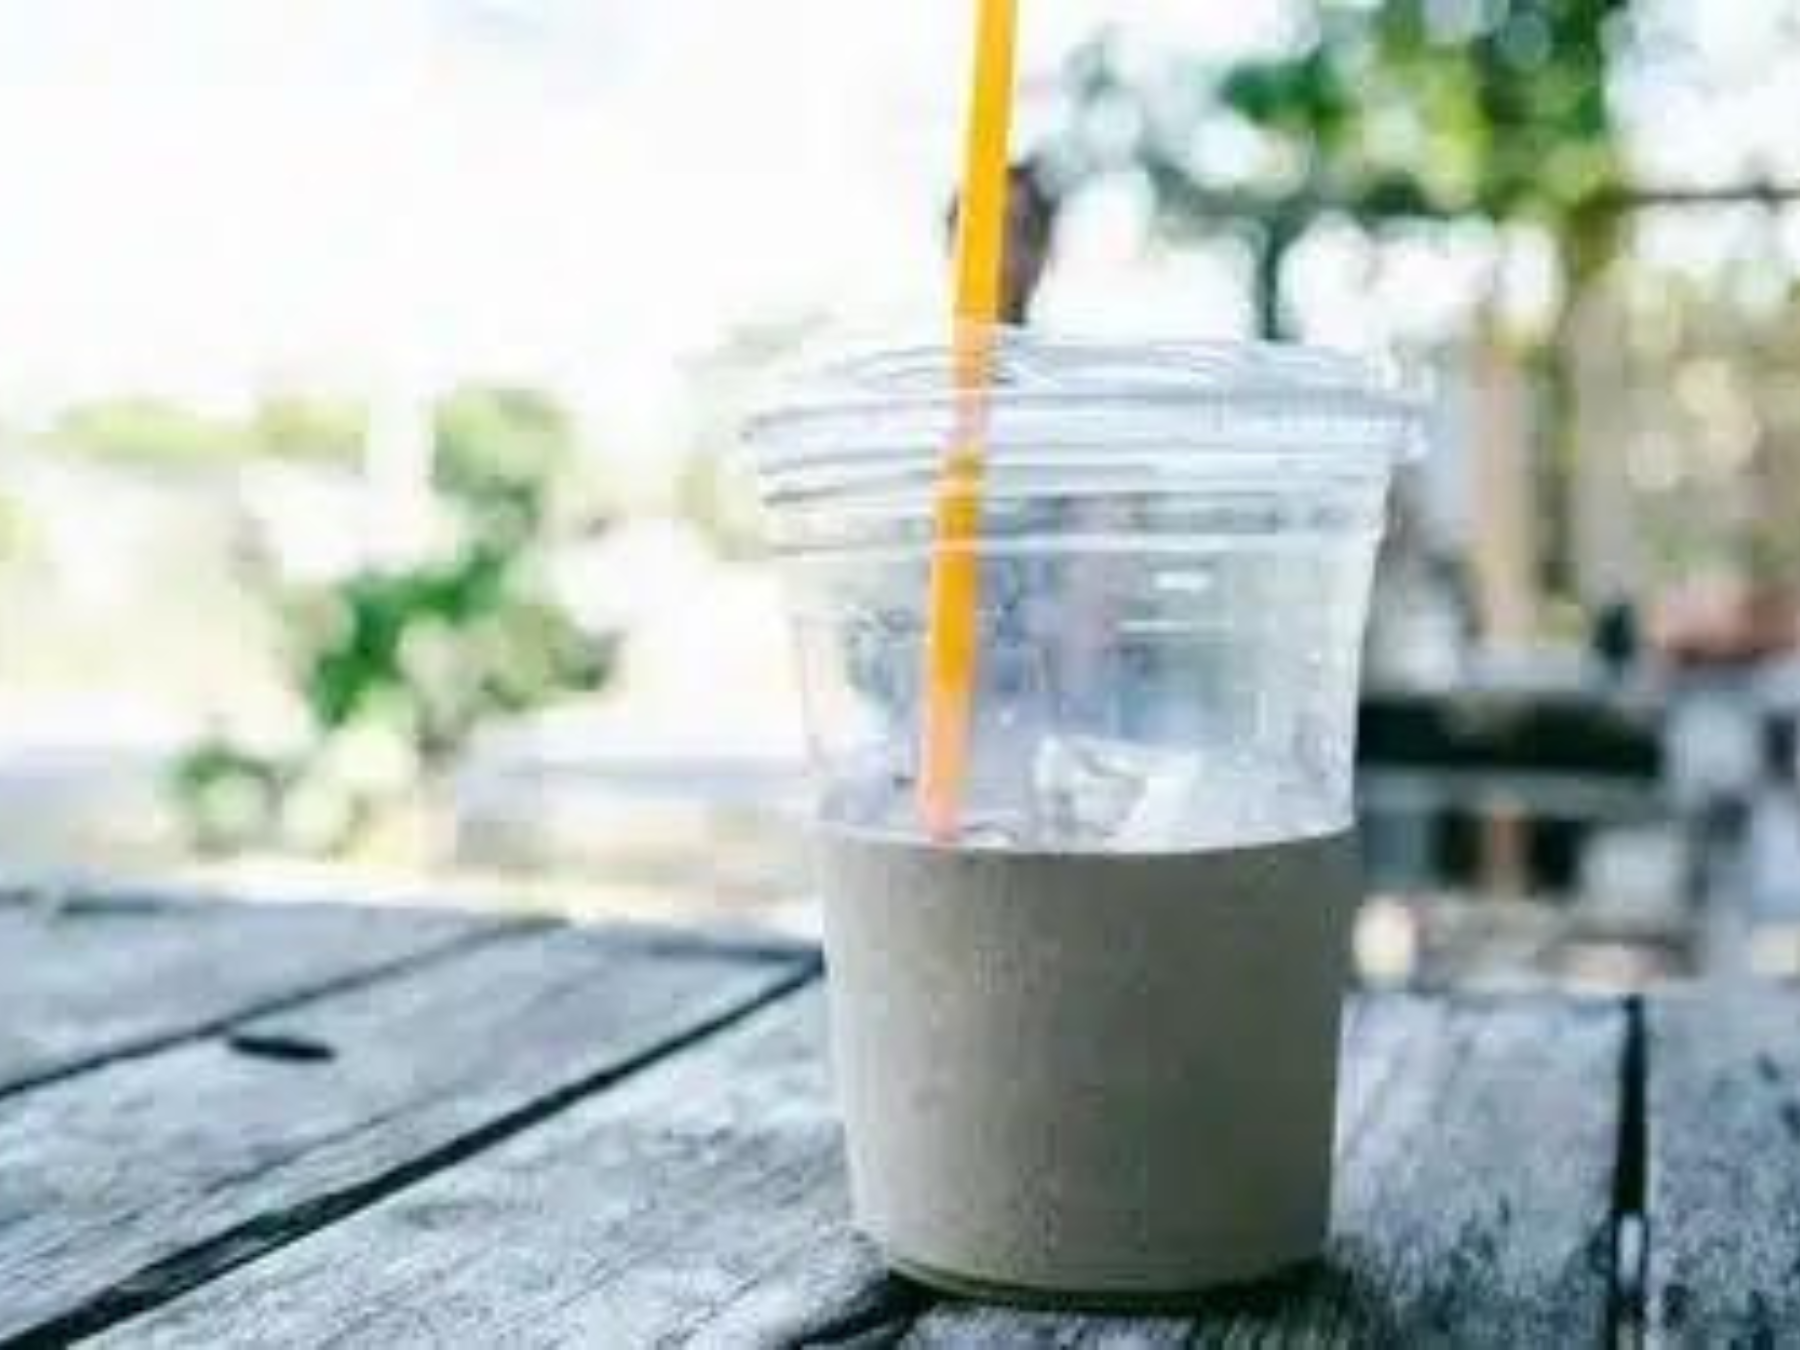 An image showing a plastic cup and a straw.